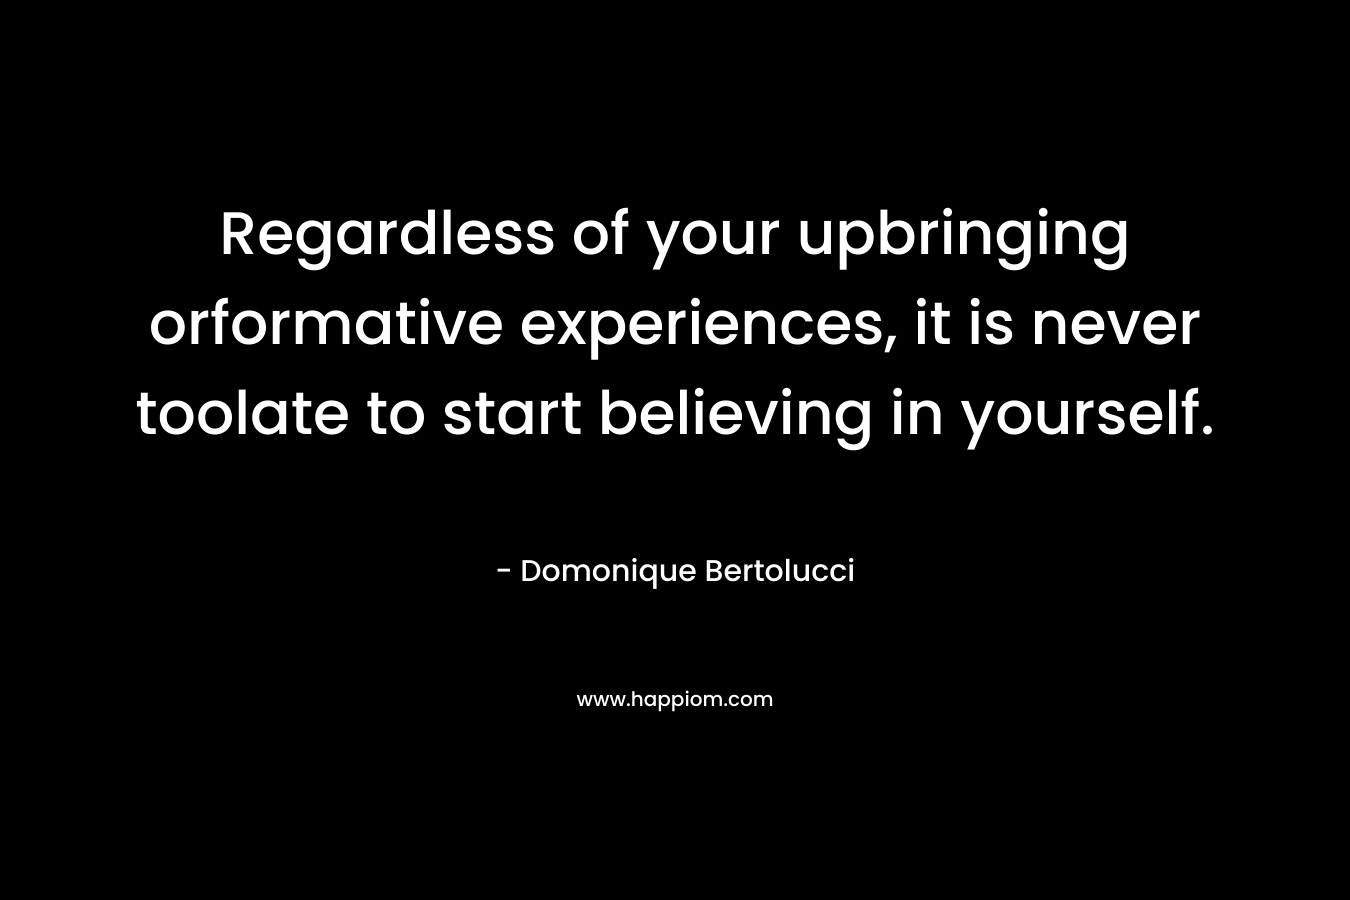 Regardless of your upbringing orformative experiences, it is never toolate to start believing in yourself. – Domonique Bertolucci